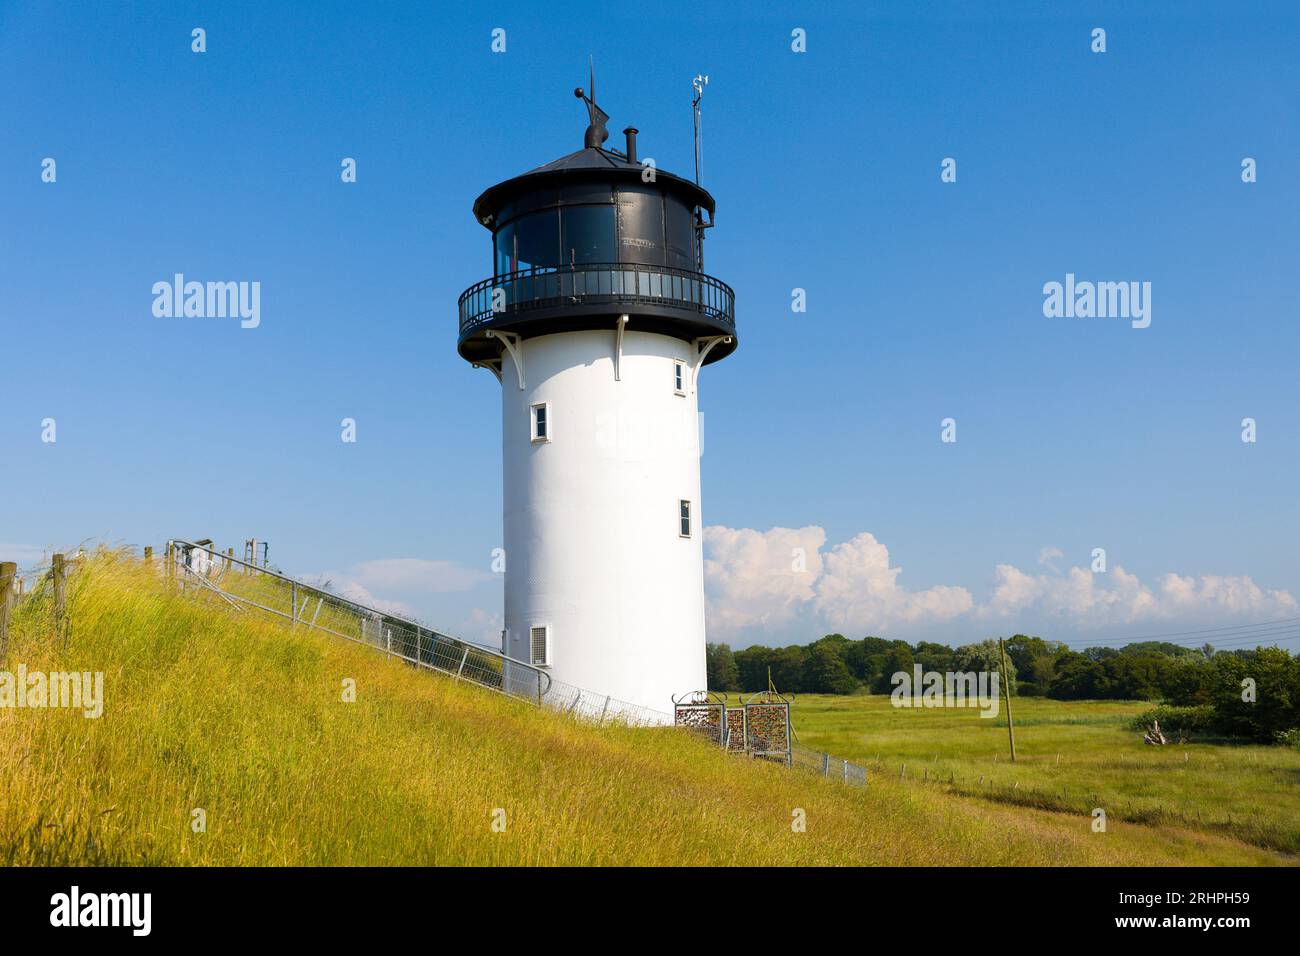 Berta, Dicke phare Altenbruch, Cuxhaven, Basse-Saxe, Allemagne Banque D'Images